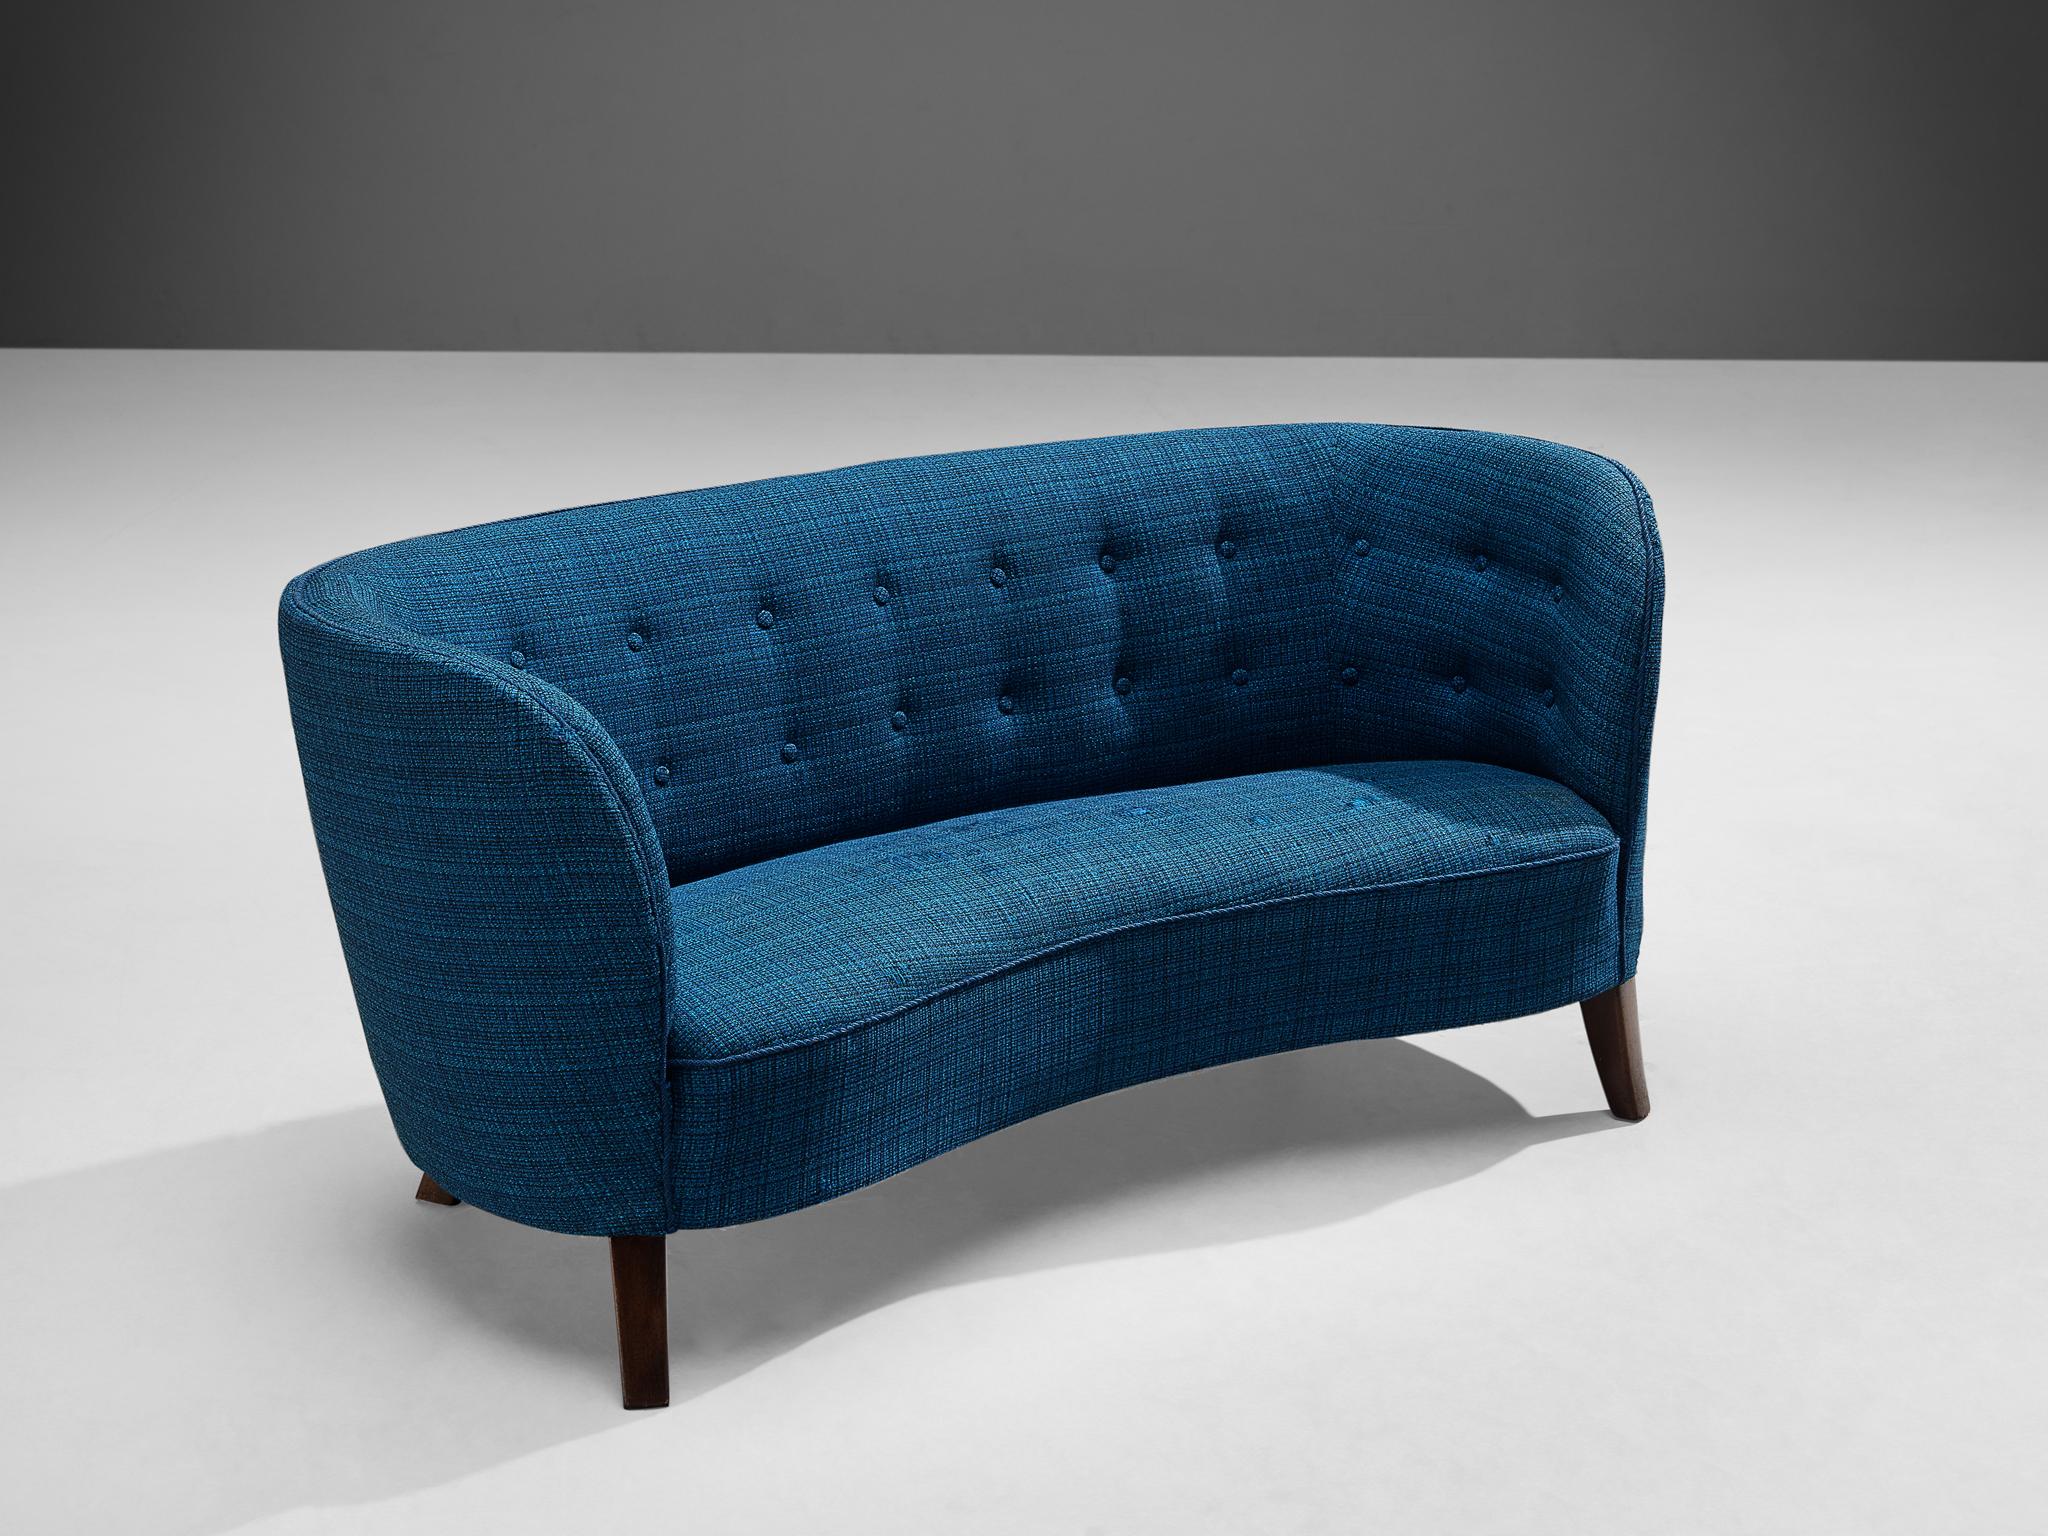 Banana sofa, fabric and oak, Denmark, 1960s.

This two seat sofa is executed in a bright blue fabric with wooden legs. The sofa has a high and curved backrest. The back gracefully flows into the armrests, creating a slightly curved shape. The piece